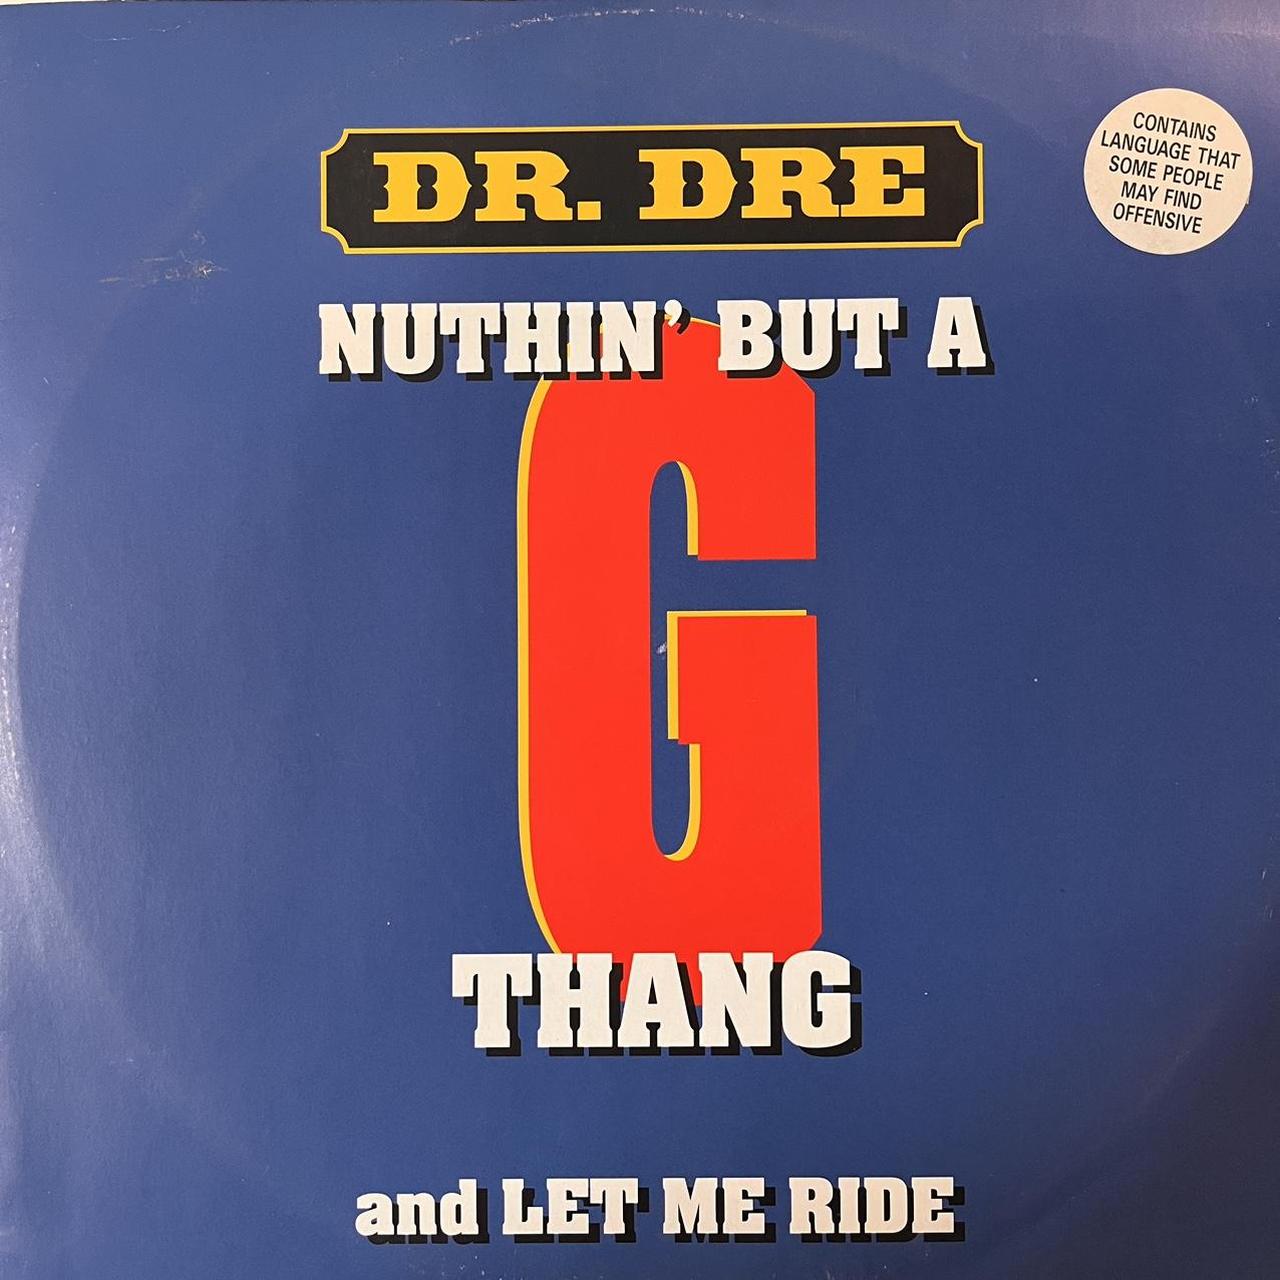 Dr Dre “Nuthin’ But A G Thang” / “Let Me Ride” 3 Version 12inch Vinyl